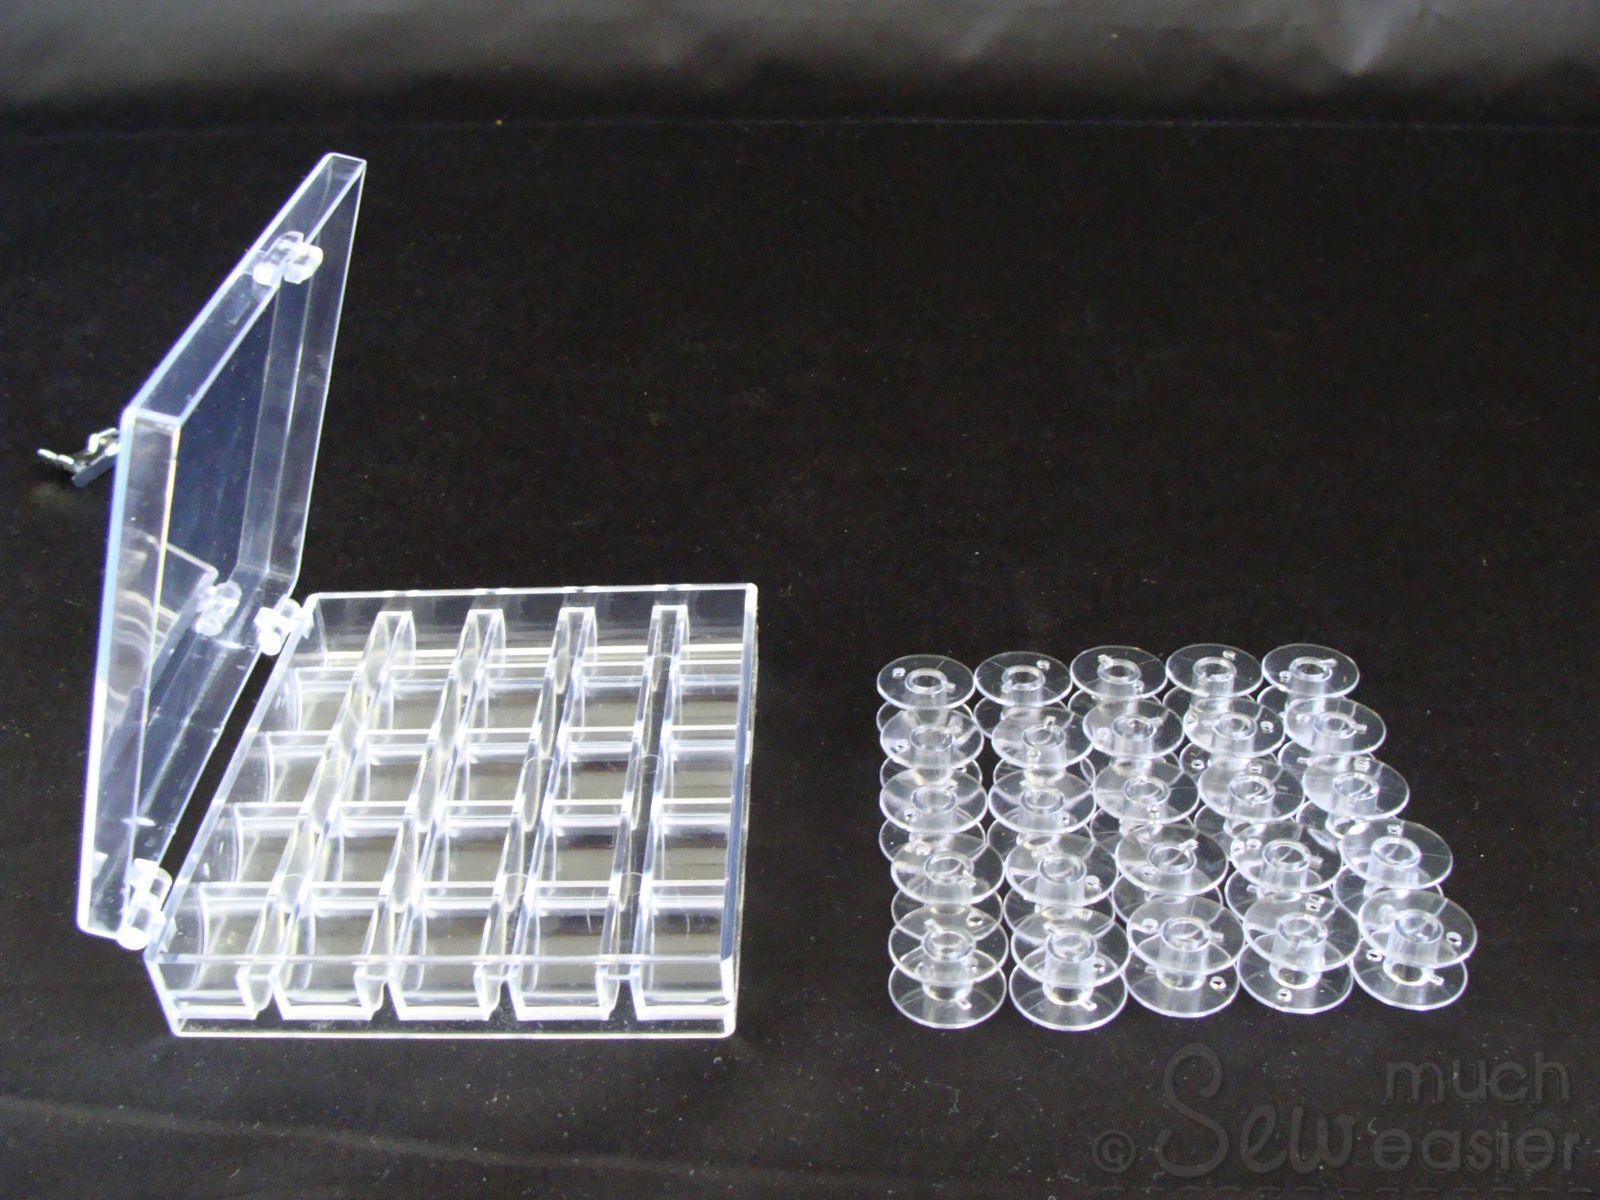 Hemline Clear Bobbin Storage Box With Lid - Holds 25 Sewing Machine Bobbins  - Simpson Advanced Chiropractic & Medical Center